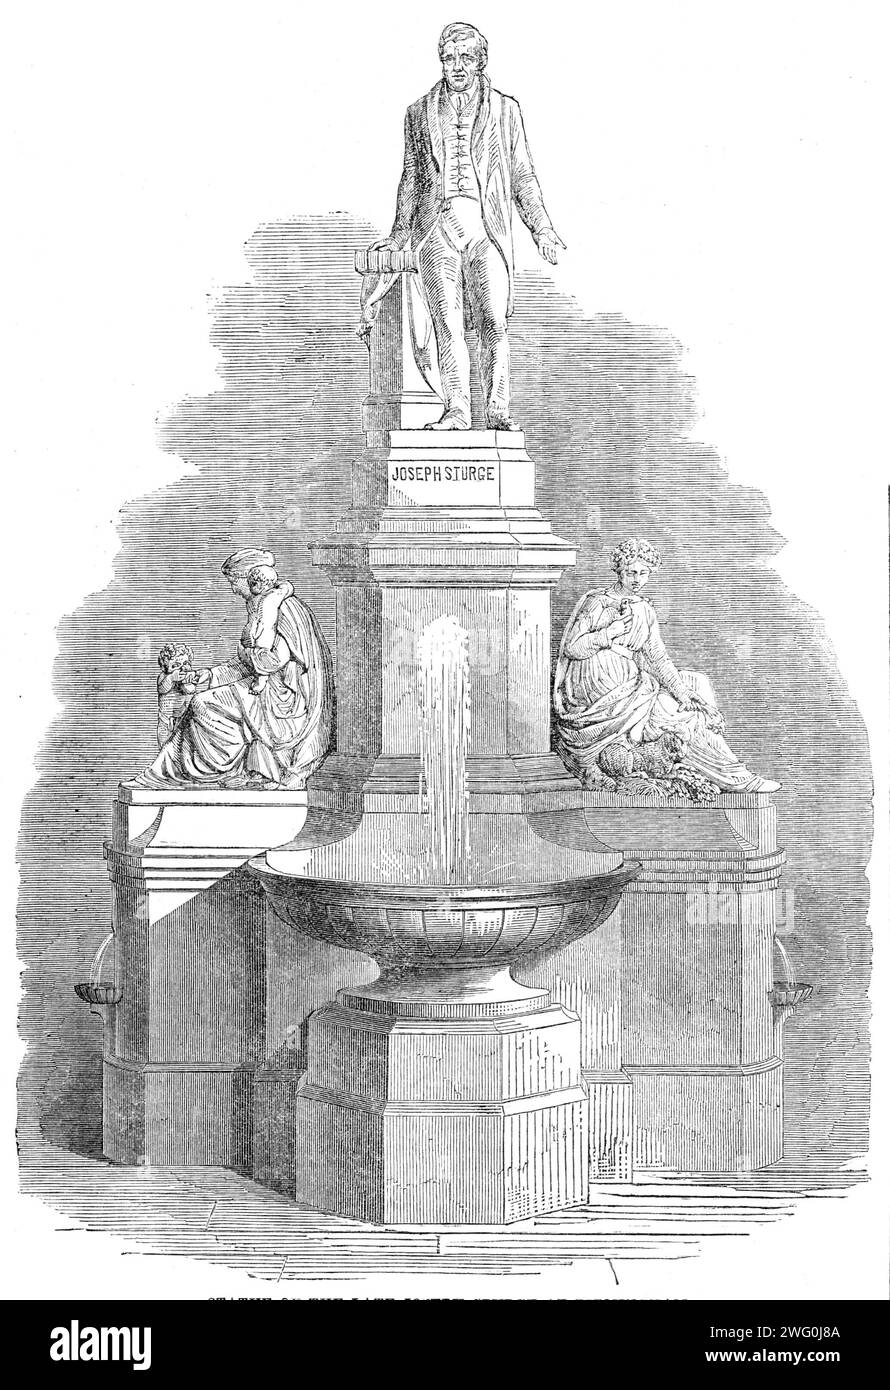 Statue of the late Joseph Sturge at Birmingham, 1862. 'A statue to the memory of Joseph Sturge, the philanthropist...The memorial, which was raised by public subscription, is erected on a good site, at a place called Five Ways...The statue, sculptured by the late Mr. Thomas, is lifelike, and bears a close resemblance to the original. The hand rests upon a Bible which is placed upon a dwarf column...The left hand is stretched forth as though Mr. Sturge was in the act of addressing an assembly. Upon the base to his right is a figure of Charity, her left arm encircling an infant, while in her rig Stock Photo